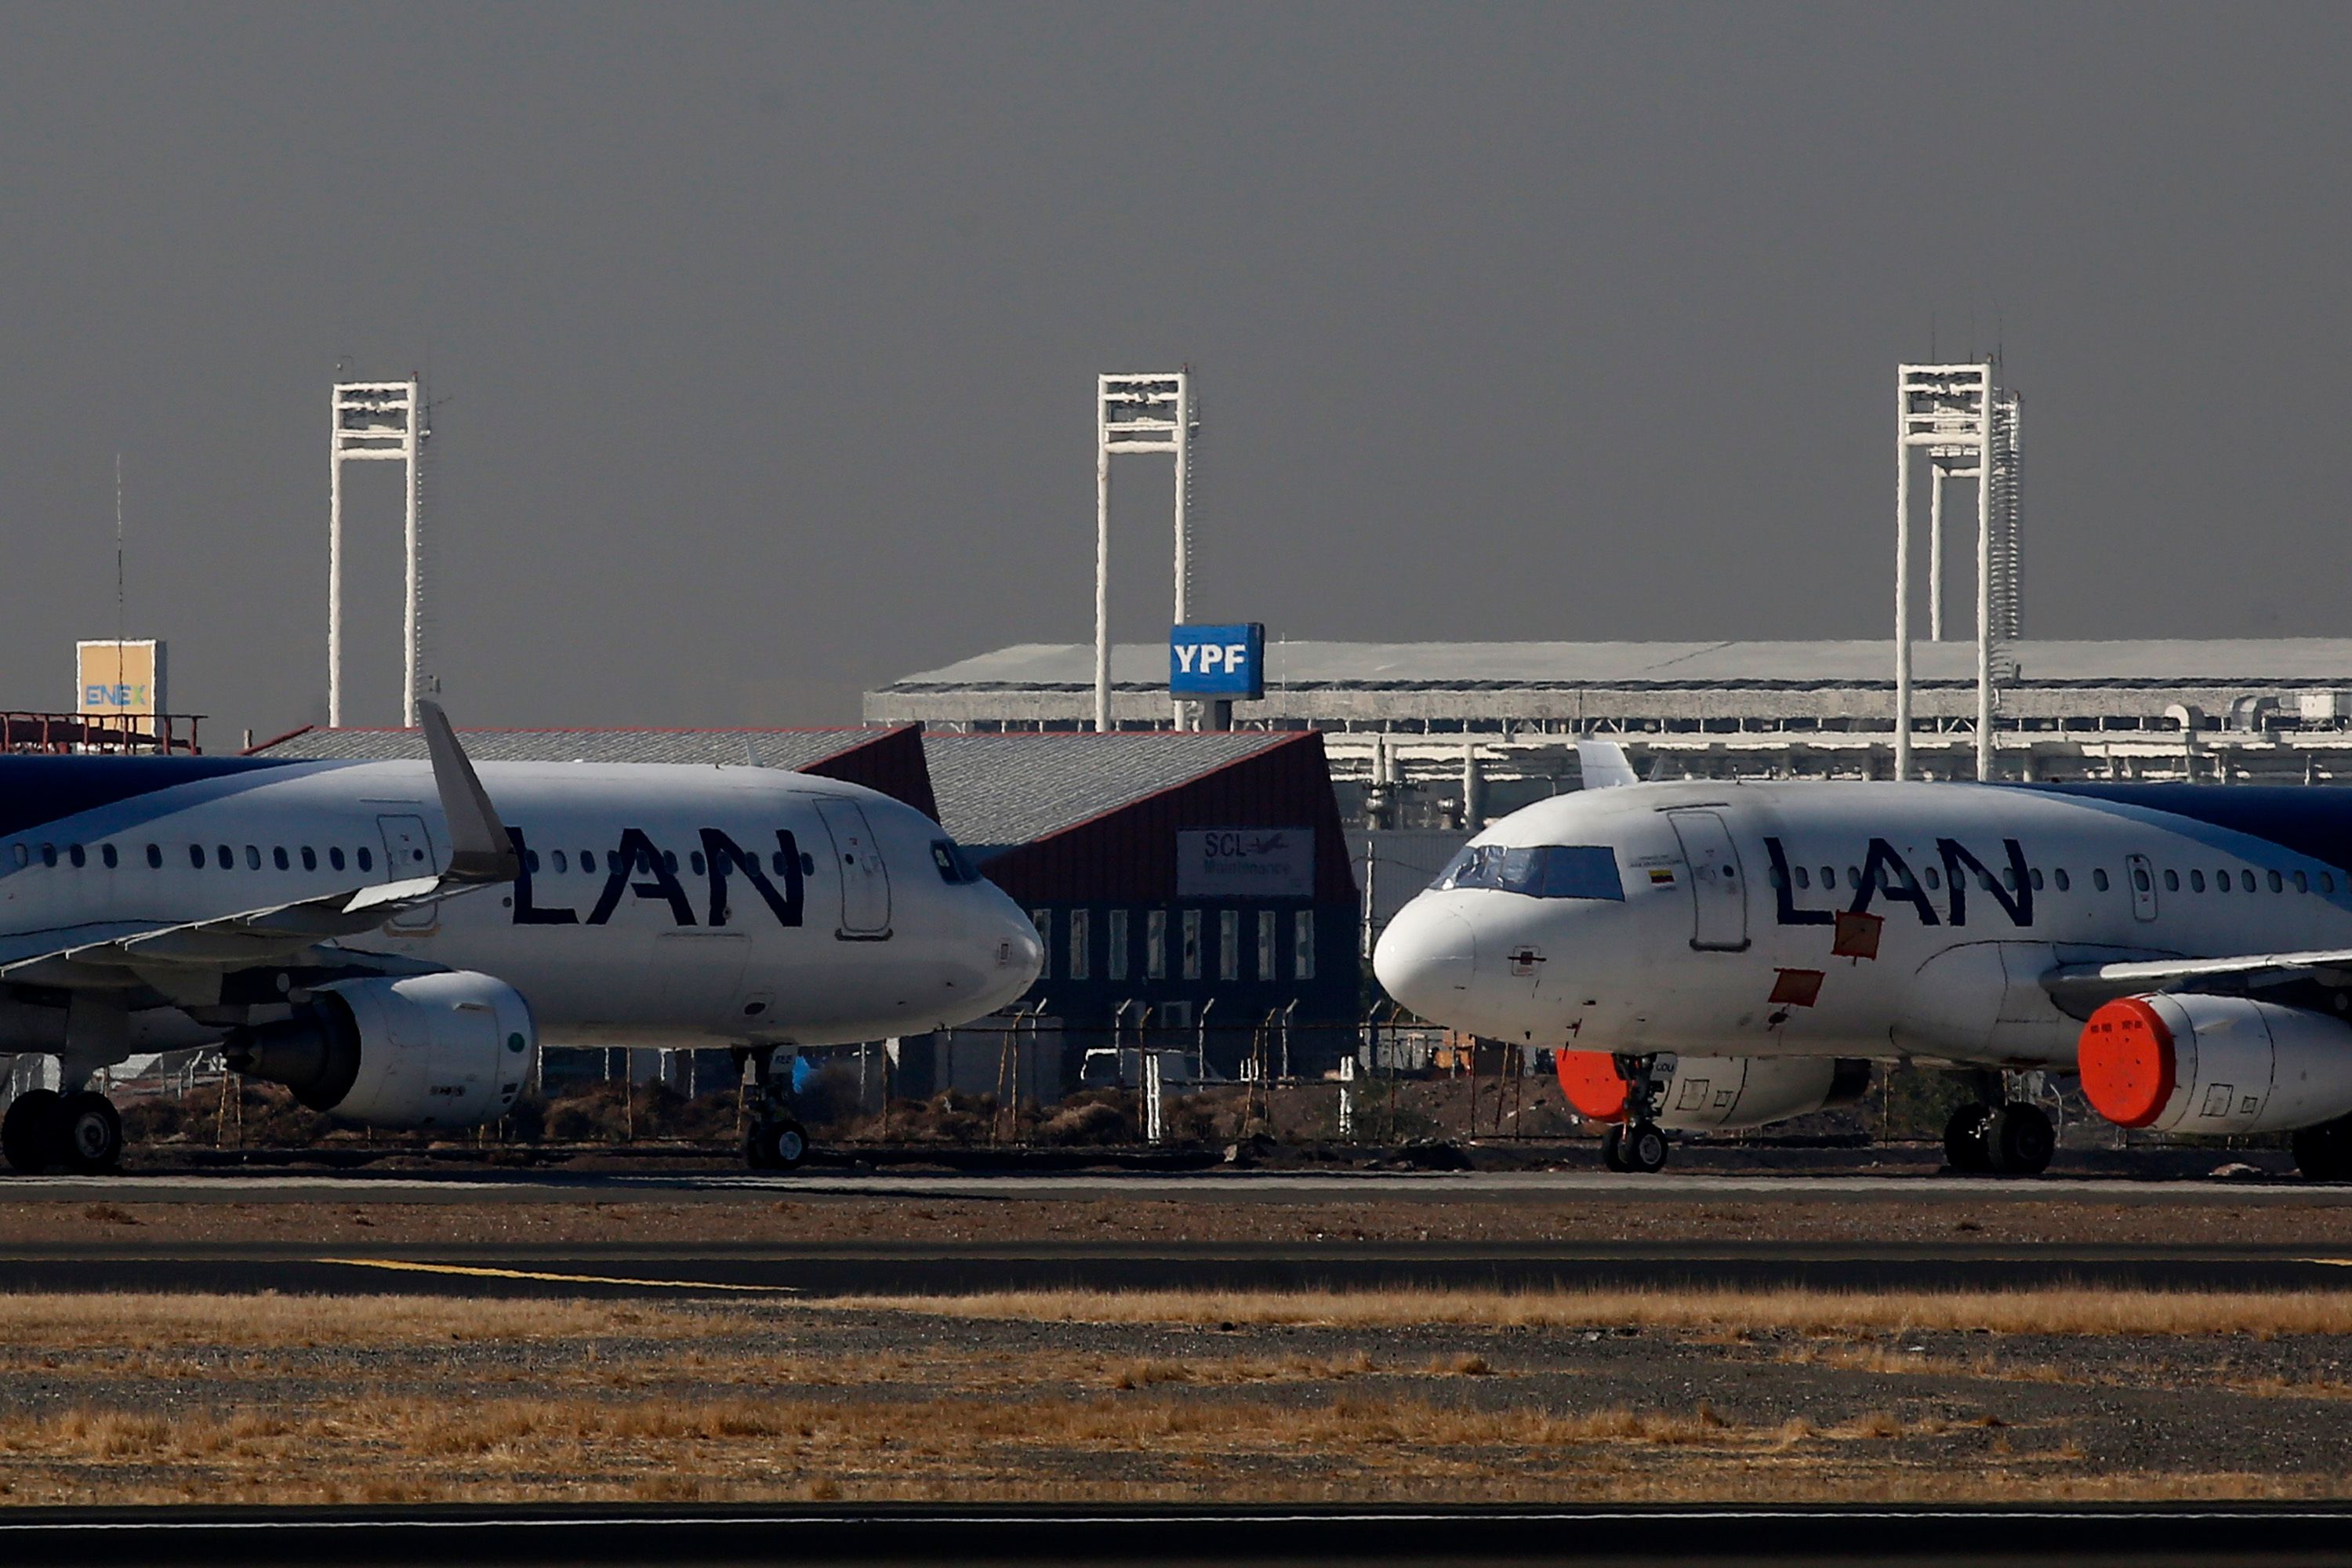 GettyImages-1215219967 - Passenger planes of LATAM airline stand parked at Arturo Merino Benitez International Airport on May 26, 2020 in Santiago, Chile.